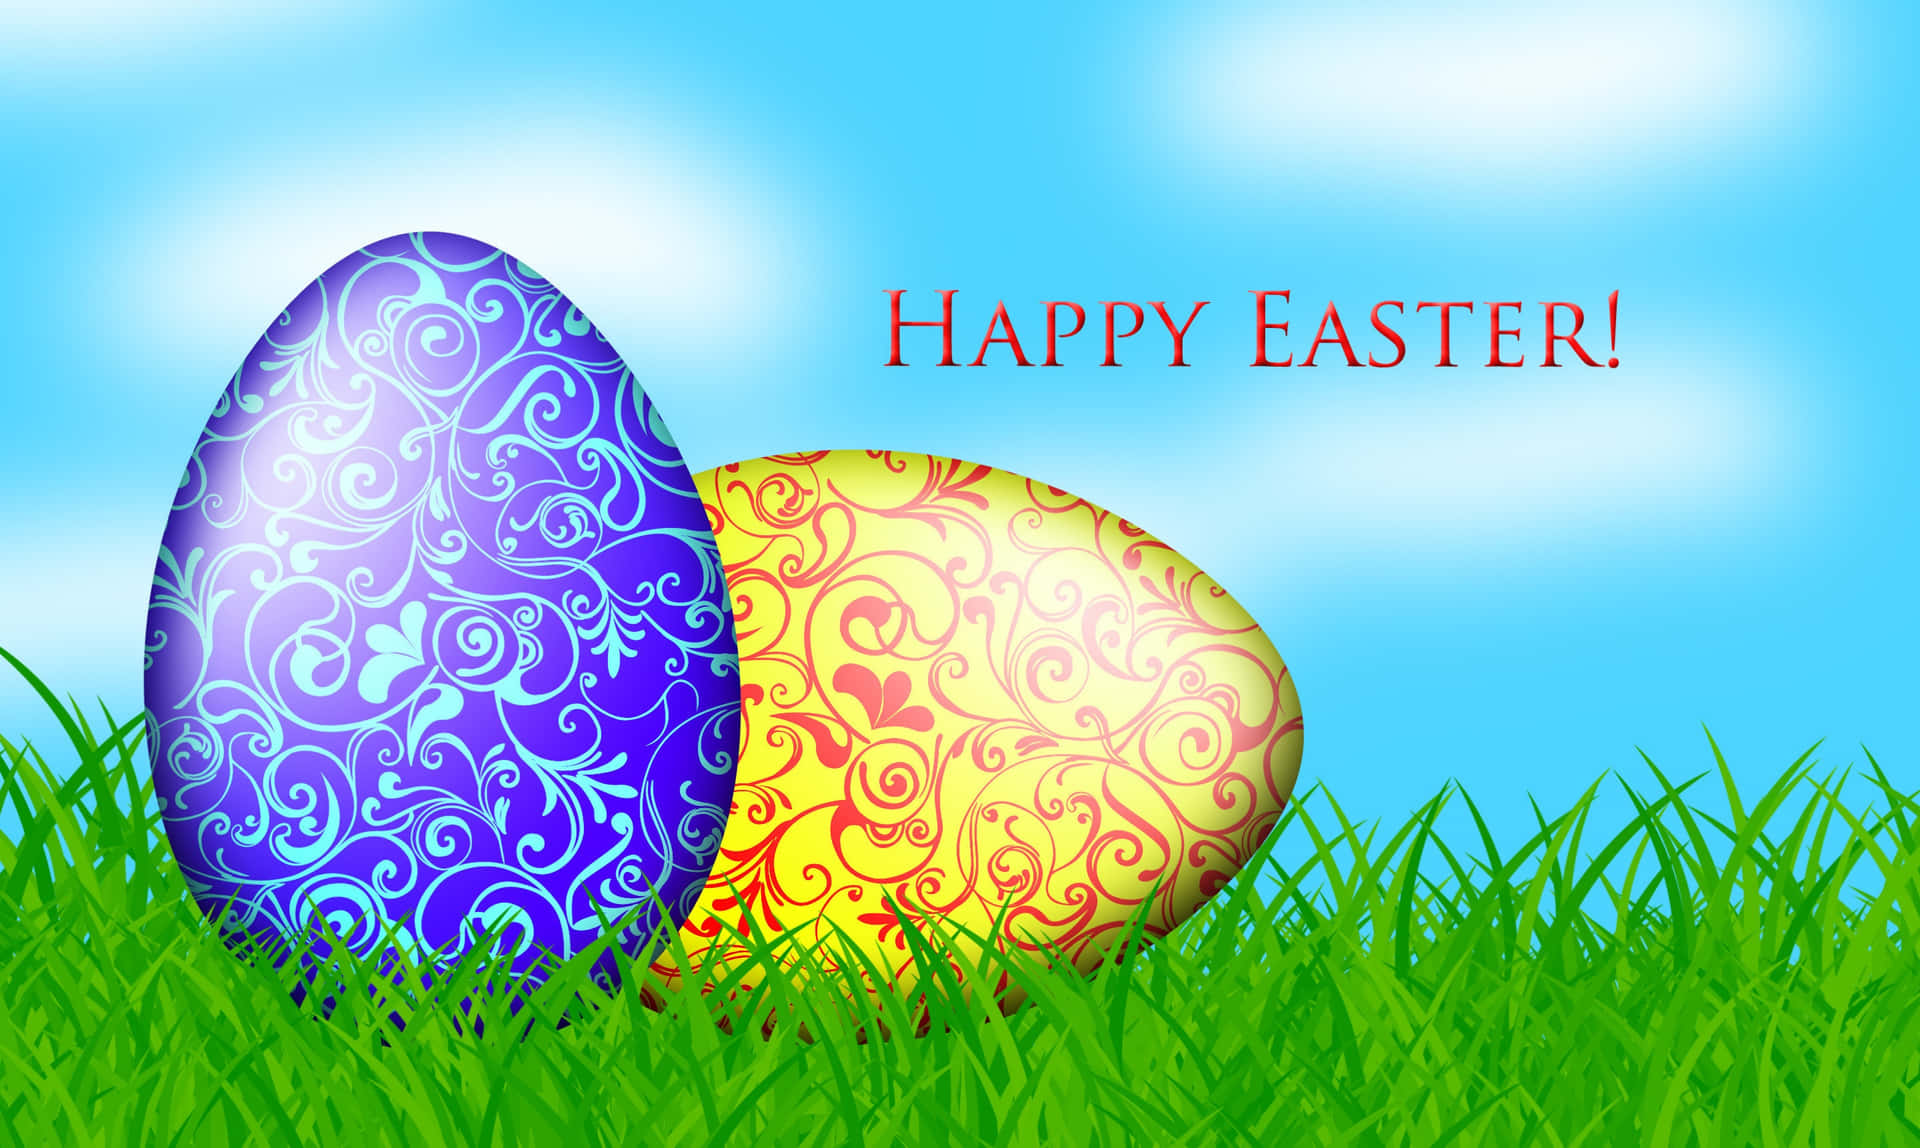 "Wishing You a Happy Easter!"